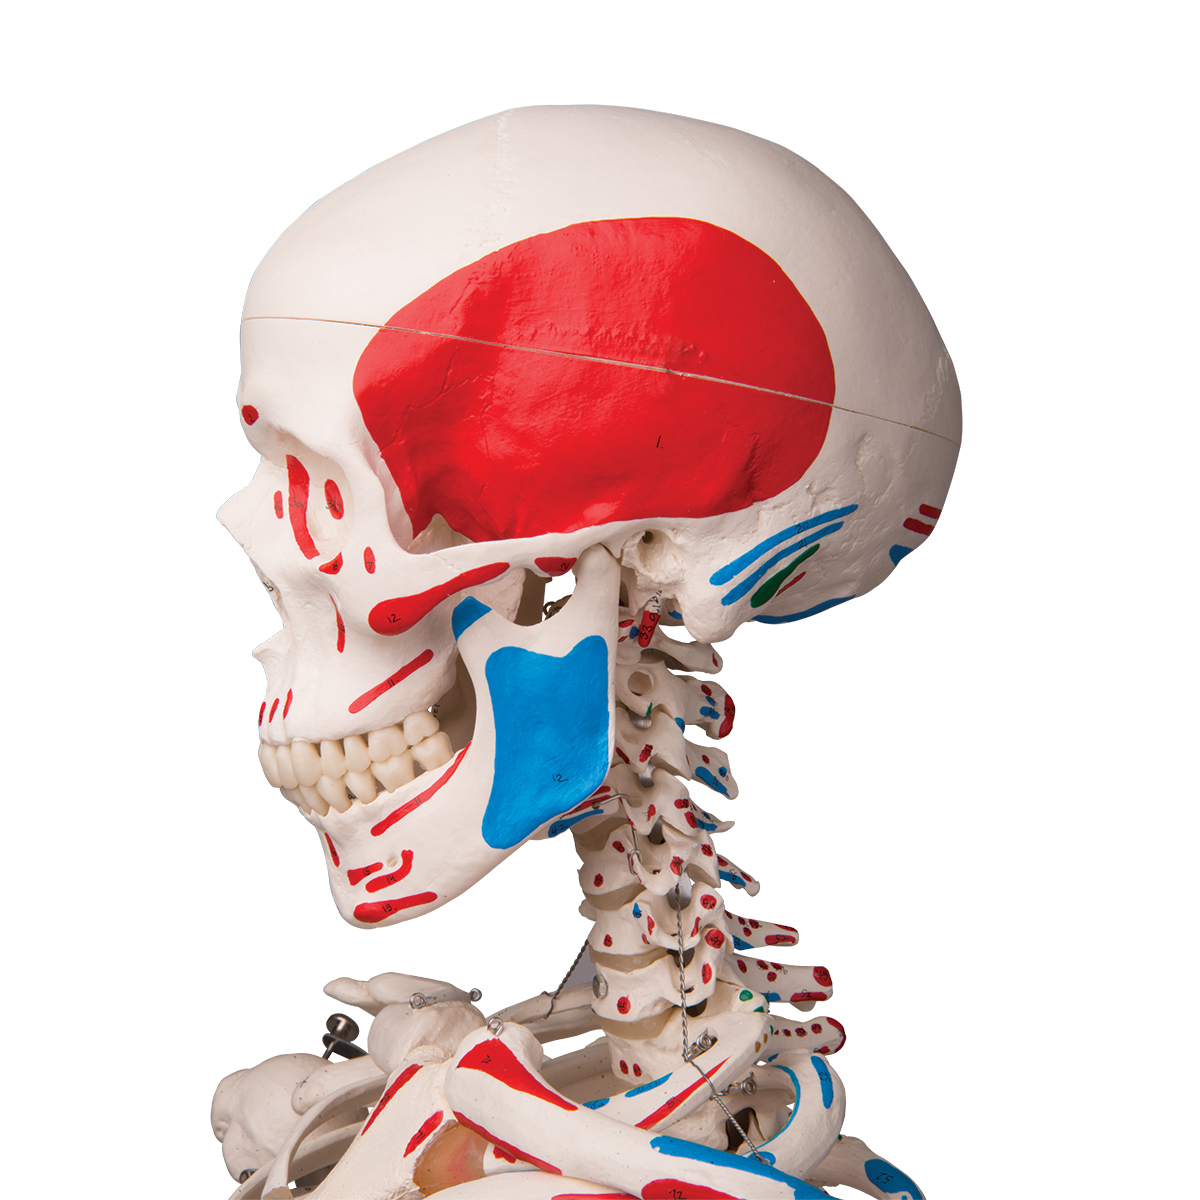 Anatomical Skeleton with Muscle Markings Model